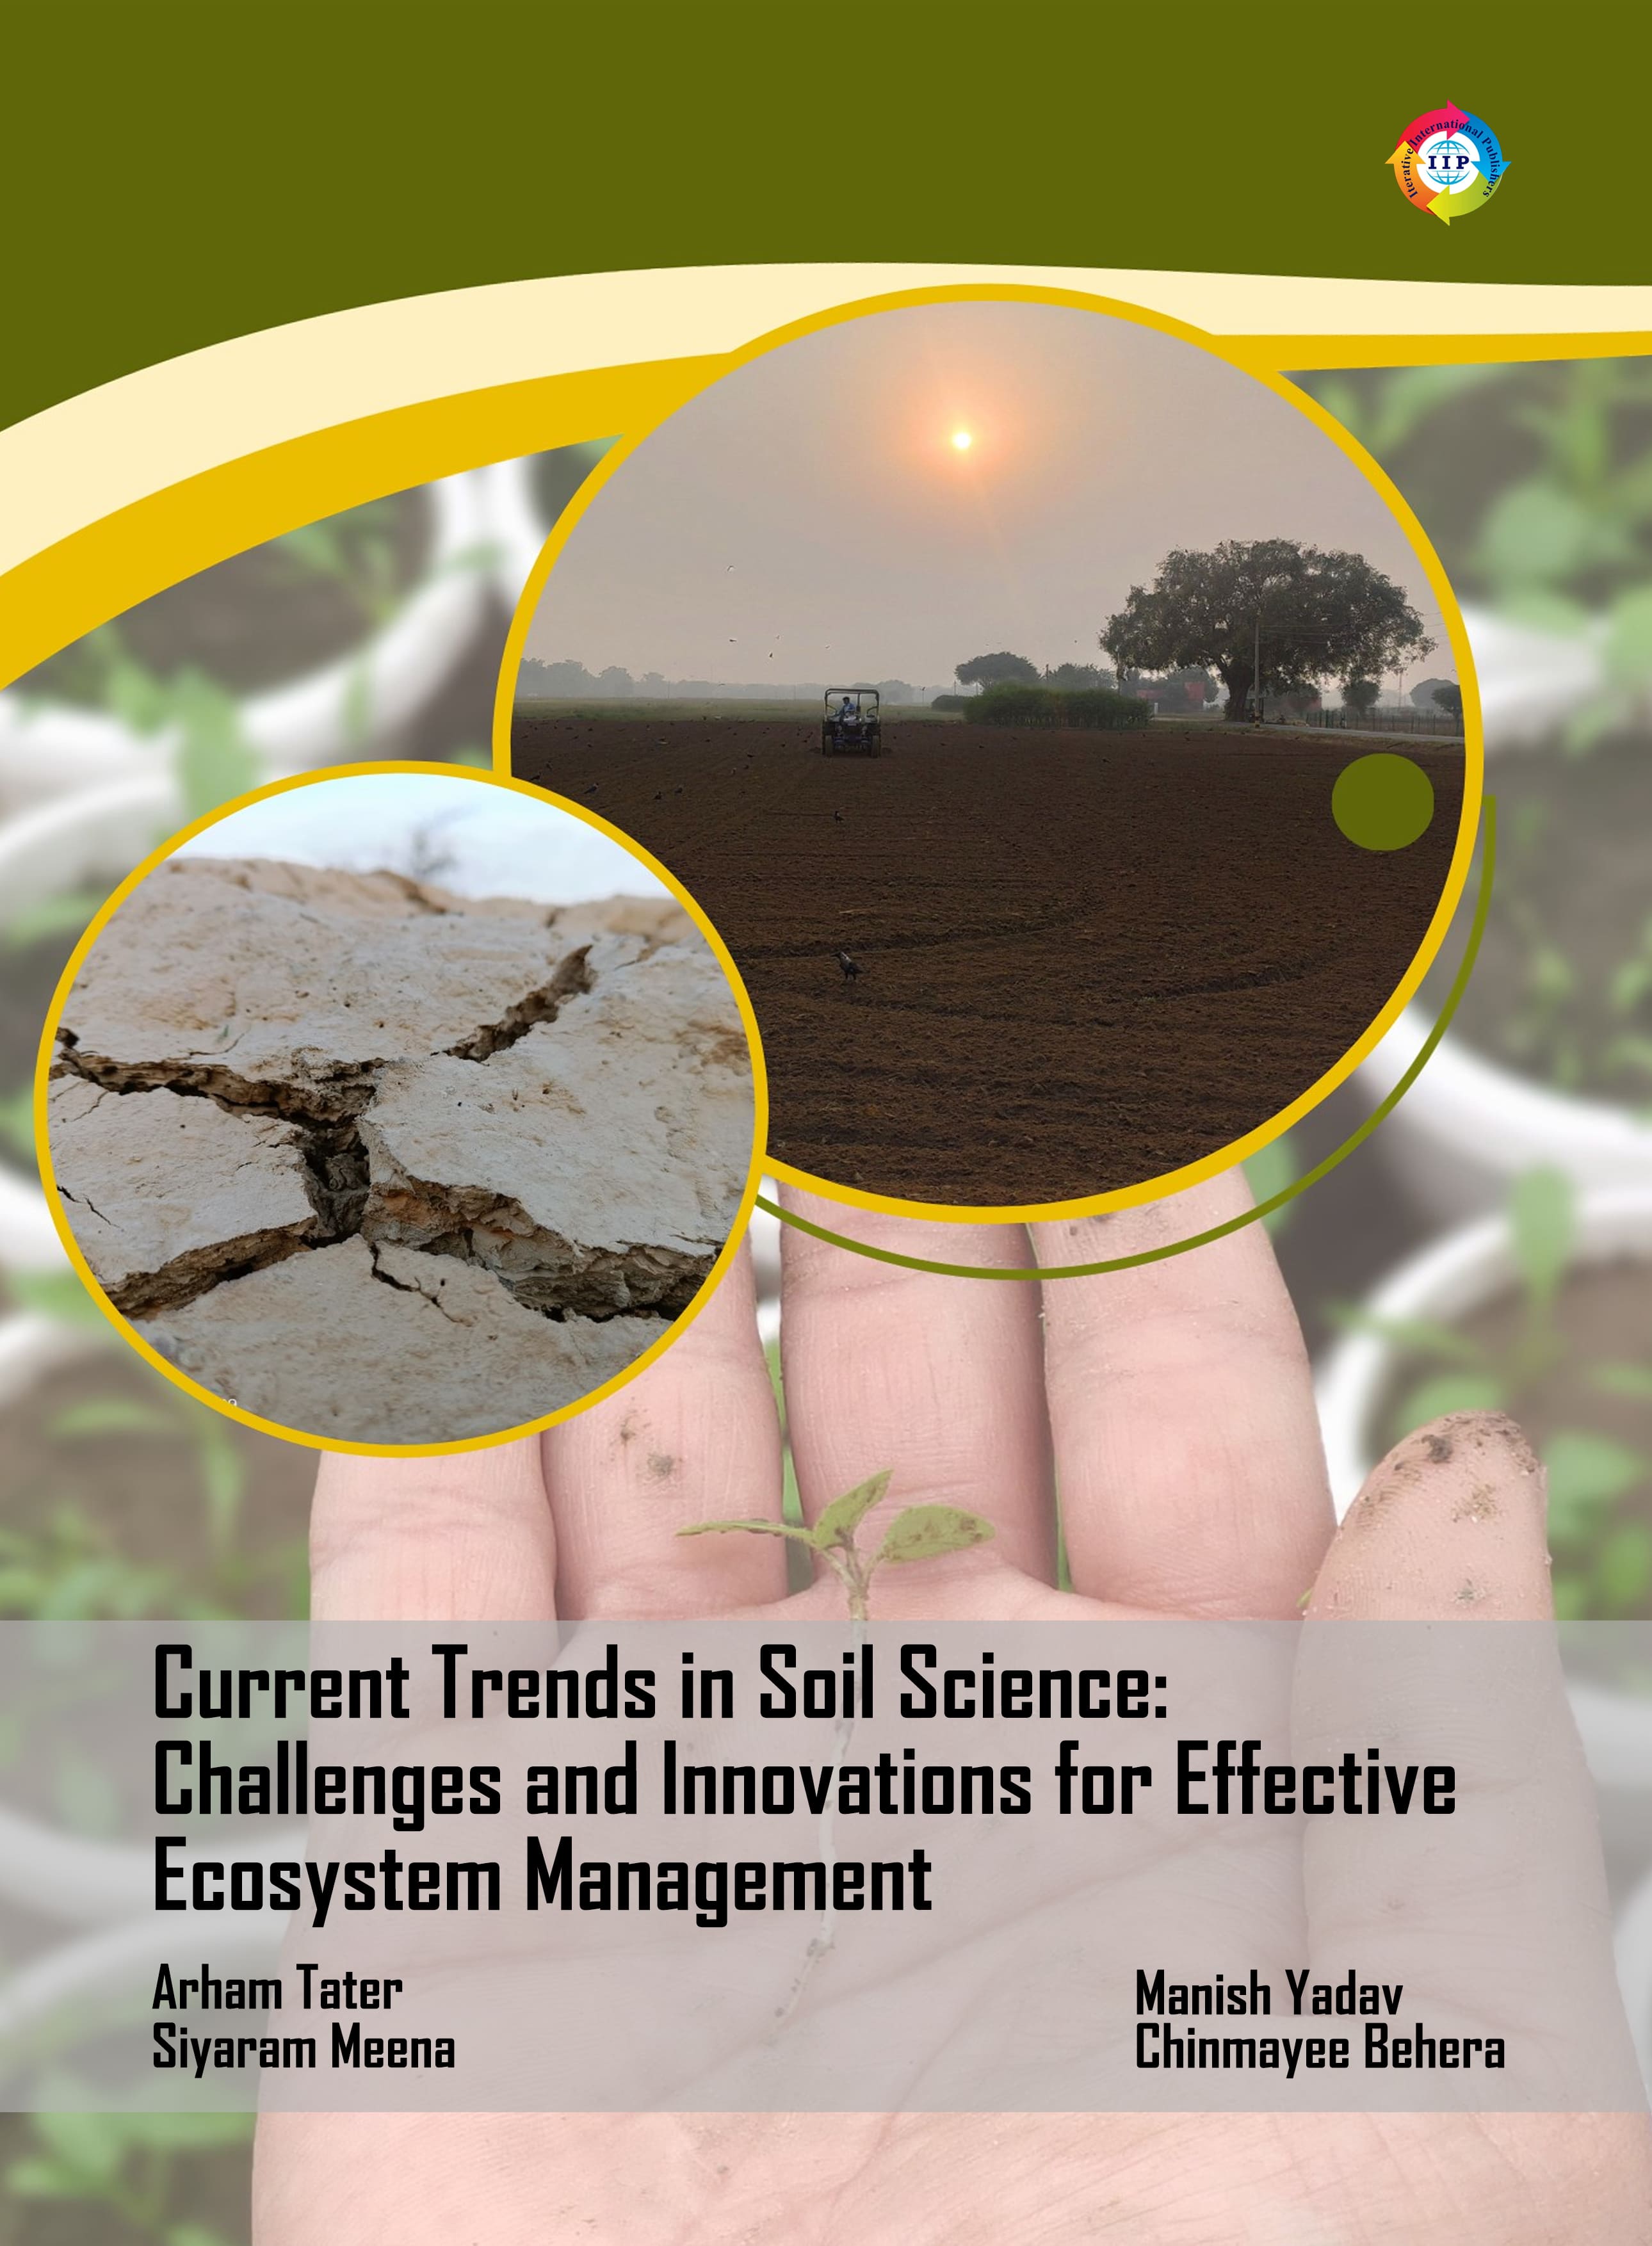 Current Trends in Soil Science: Challenges and Innovations for Effective Ecosystem Management